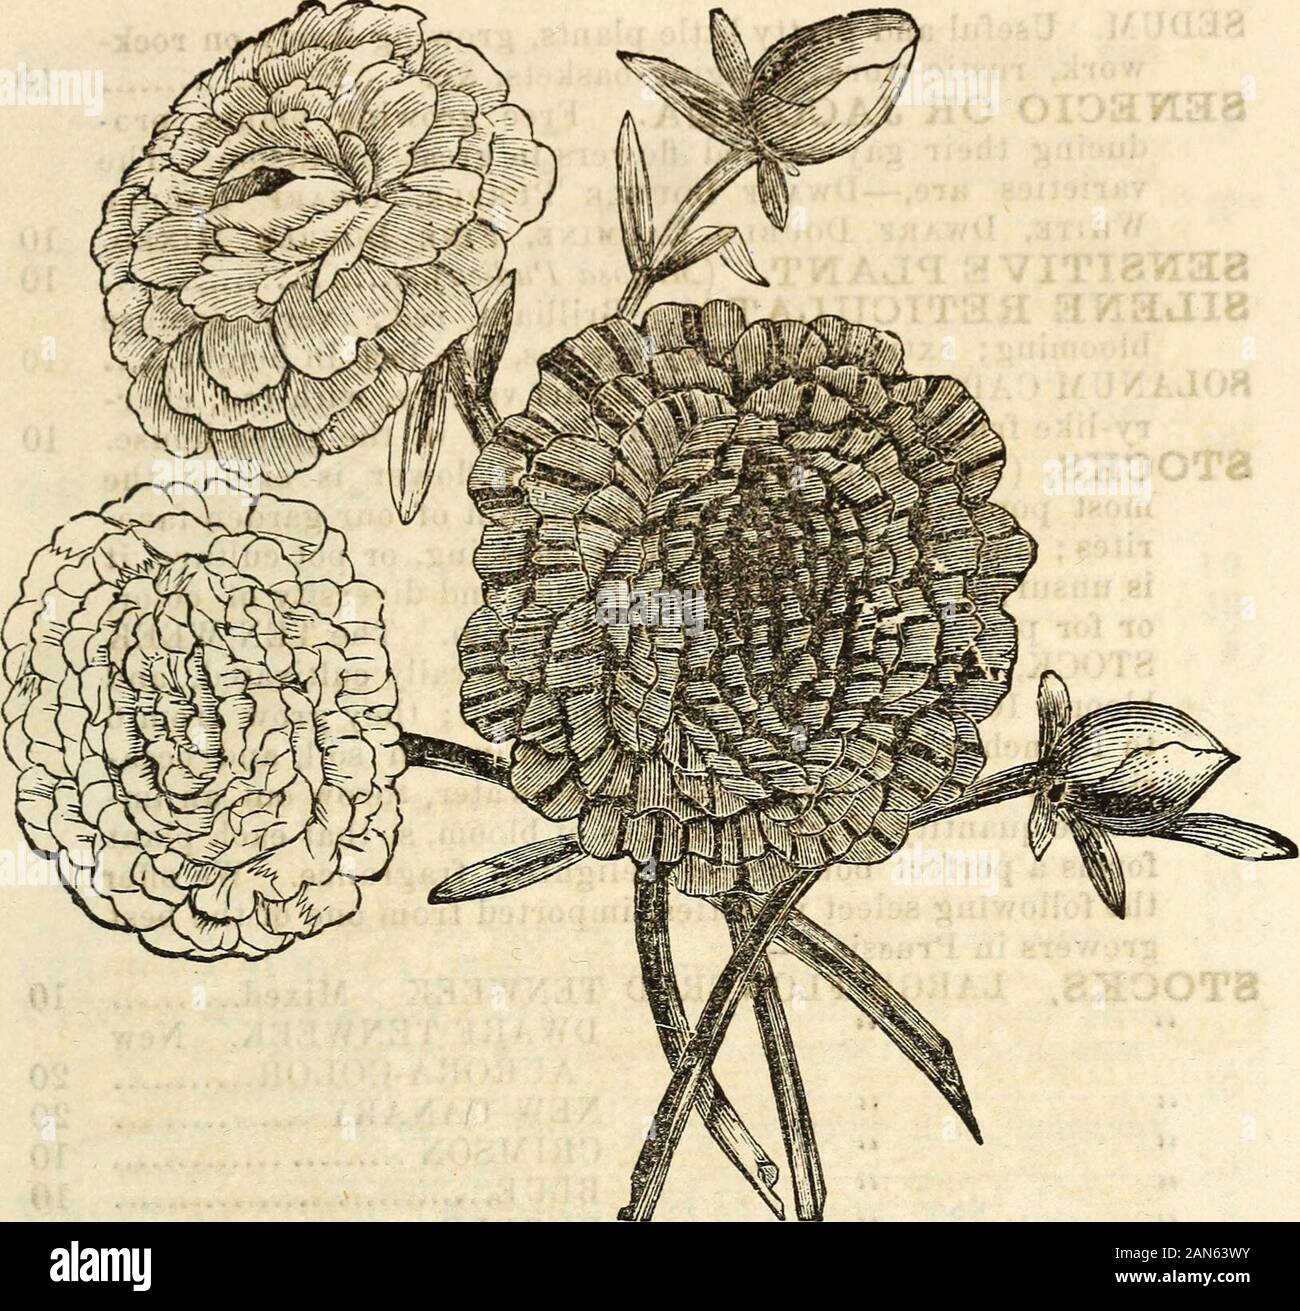 Dreer's garden calendar 1872 . Of dwarf compact growth, profusion of bloomthroughout summer and late autumn. The varieties are,—MuLTiFLORA, Tosy pink; Ocymoidies, a perennial variety, one of the finest plants for covering rock work each, 10 * CALABRICA MARGINATA. Color rose and white 10 SCARLET RUNNER. {Phaseolus Coccineus) Flowering Bean.... 6SCABIOSA {Mourning Bride, or Sweet Scabius). Plants withbeautiful flowers; adapted for border cultivation, hardy. * Fine German varieties ; mixed 6 * Stellata (Starry Mourning Bride) 6 * NANA. Dwarf. CANDIDISSIMA. White, each 10 SCHIZANTHTJS. A splendid Stock Photo